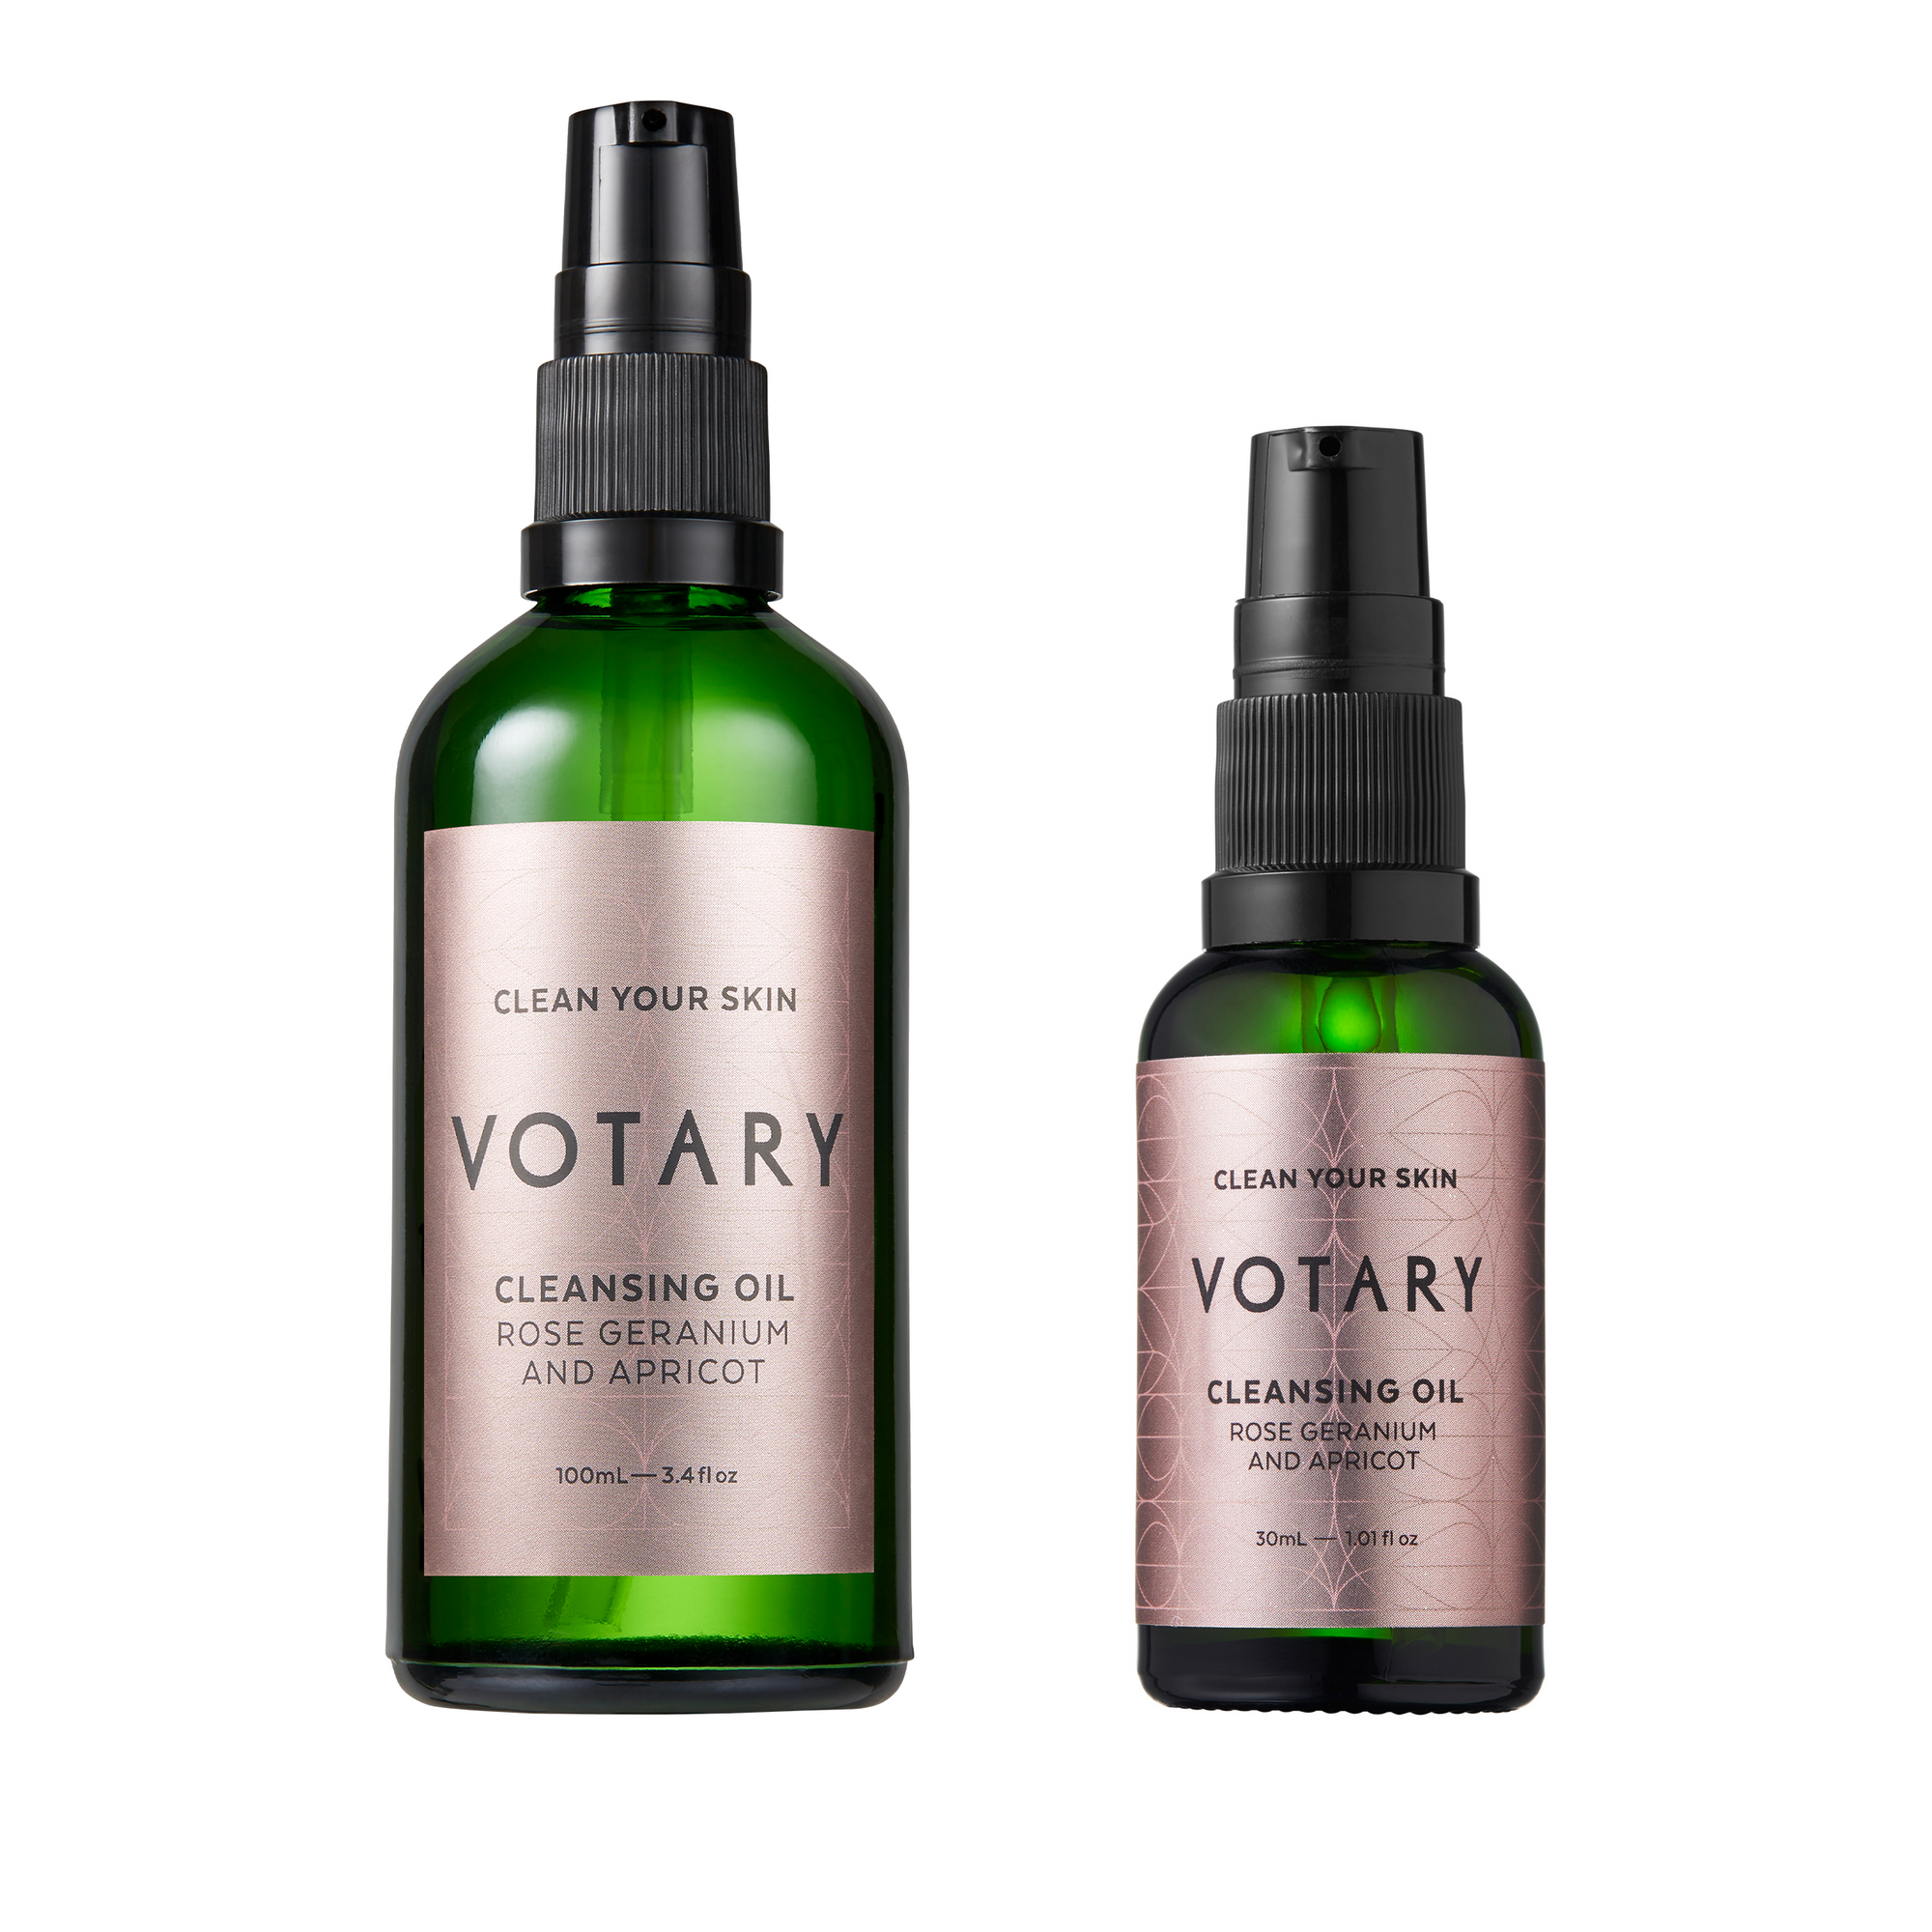 Sky Organics Youth Boost Makeup Cleansing Oil • Becomevibrant